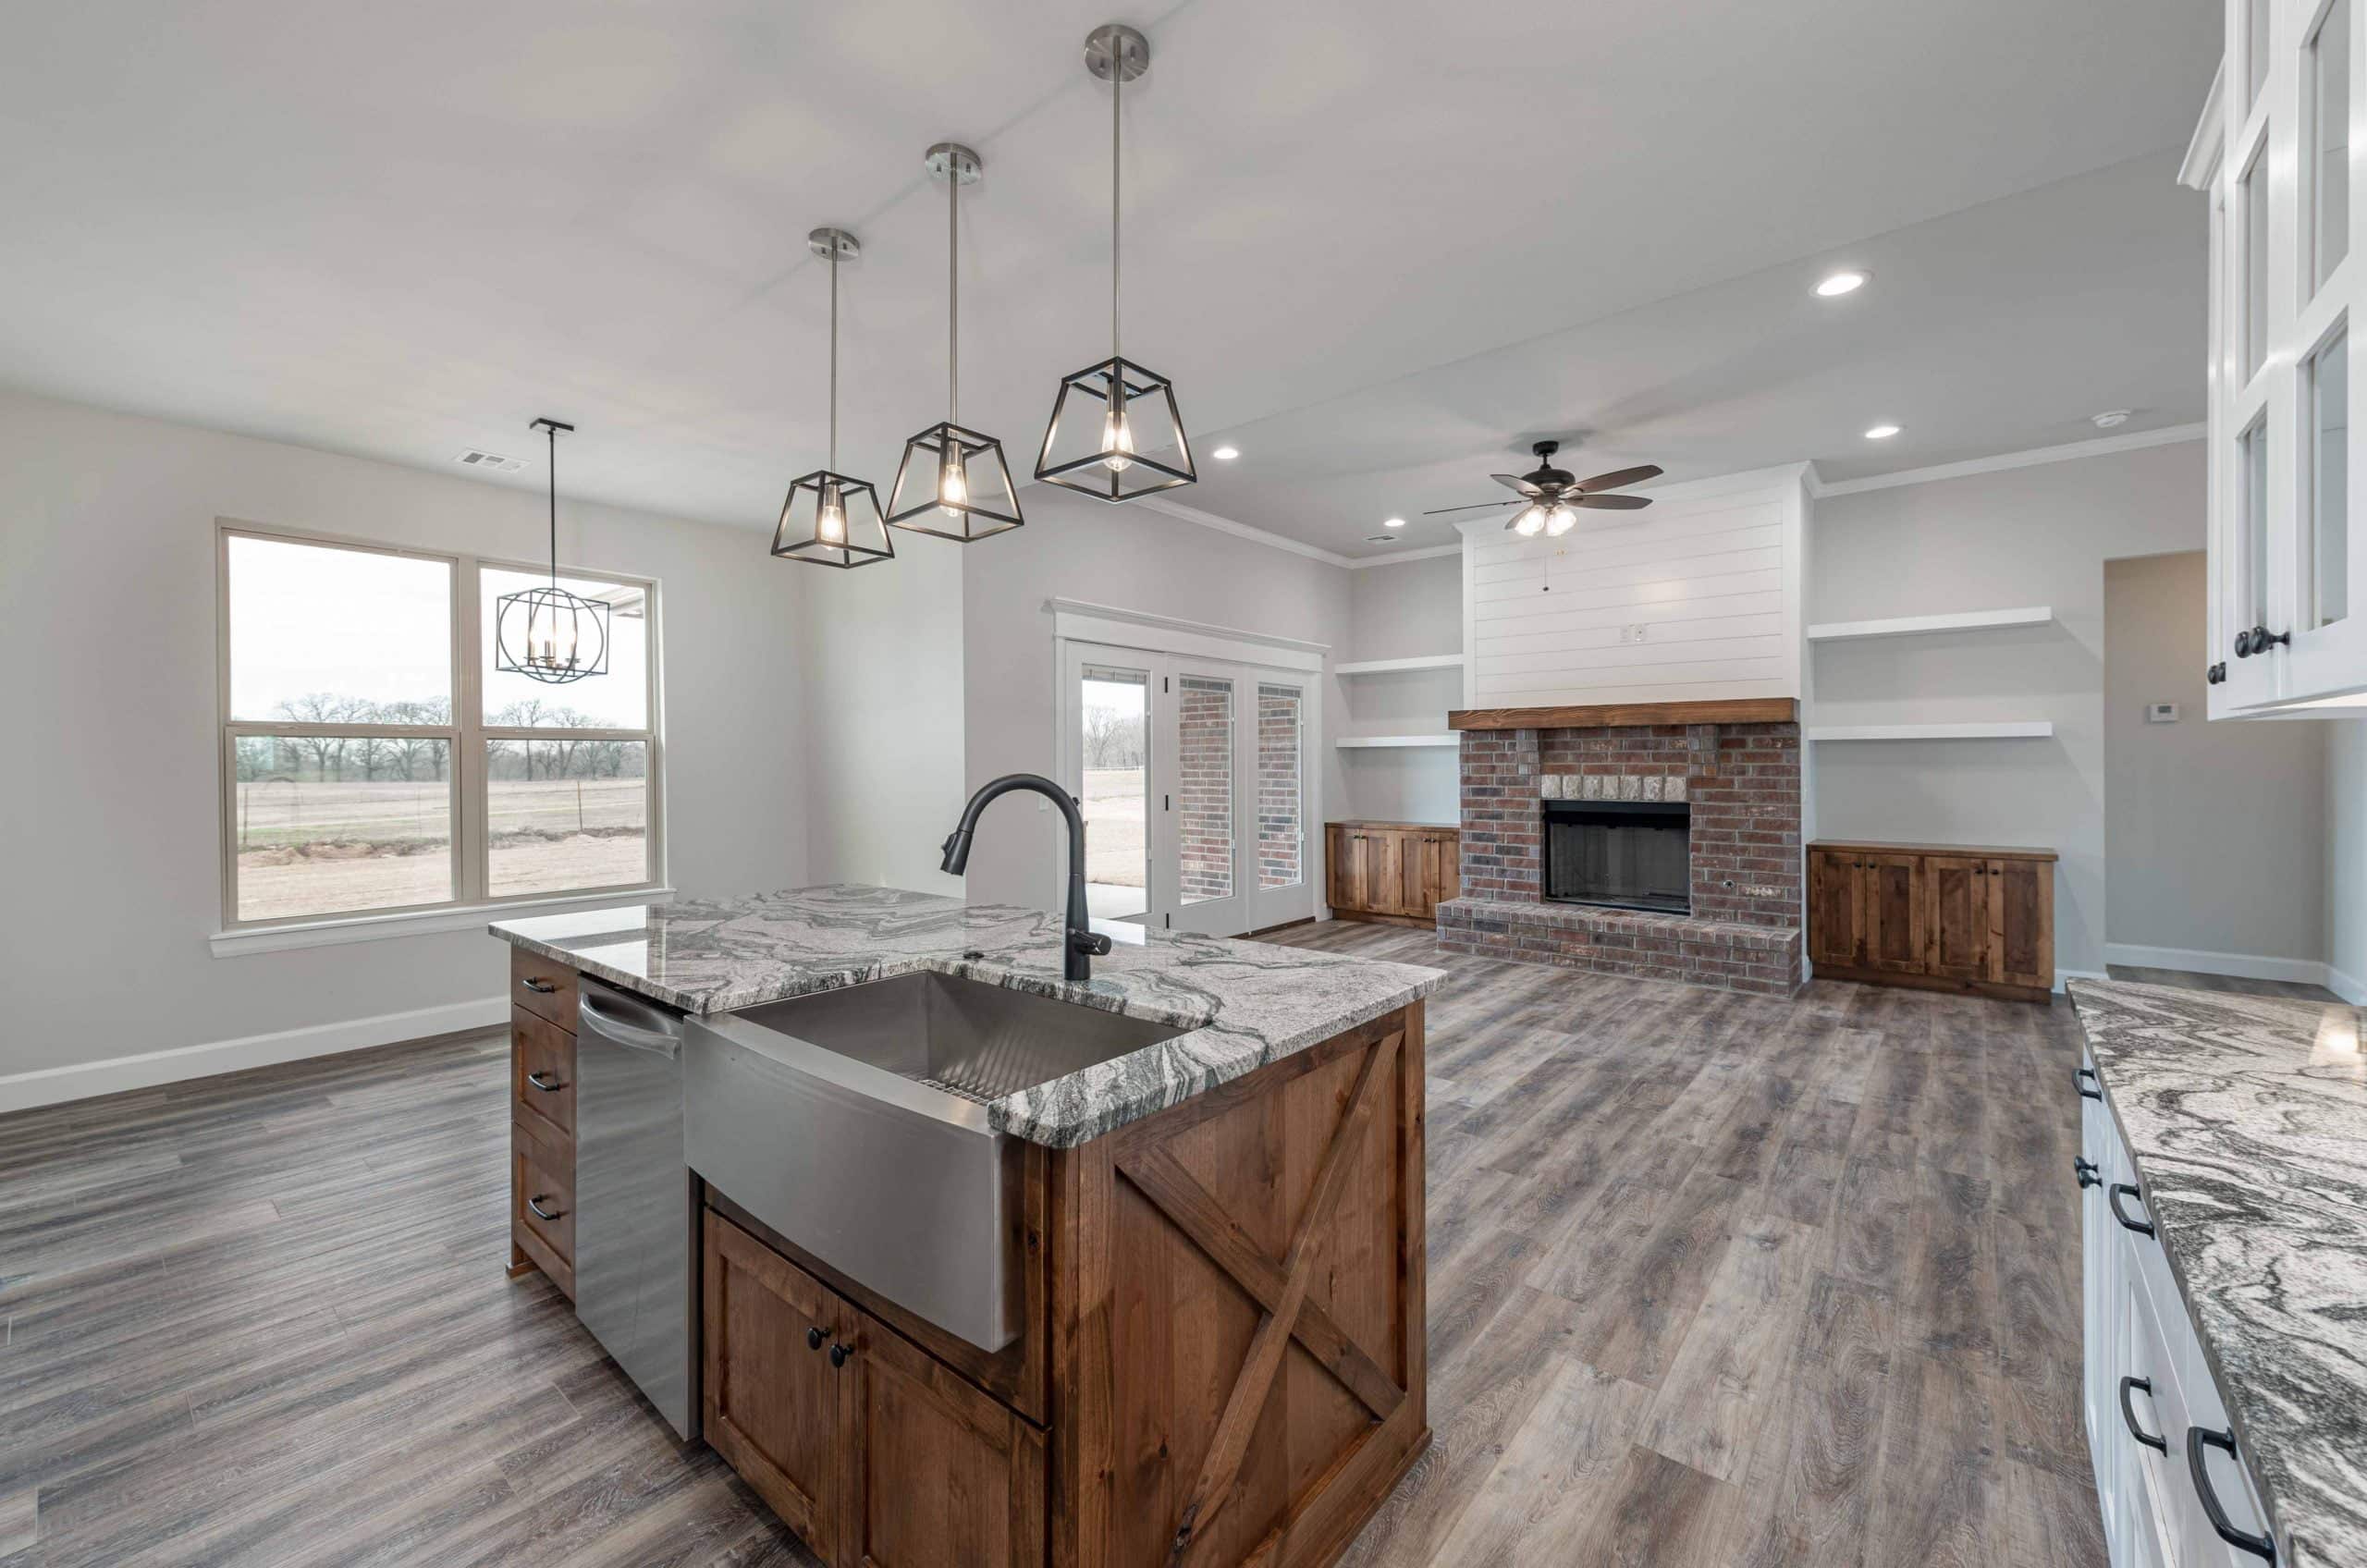 real estate photo of newly built kitchen